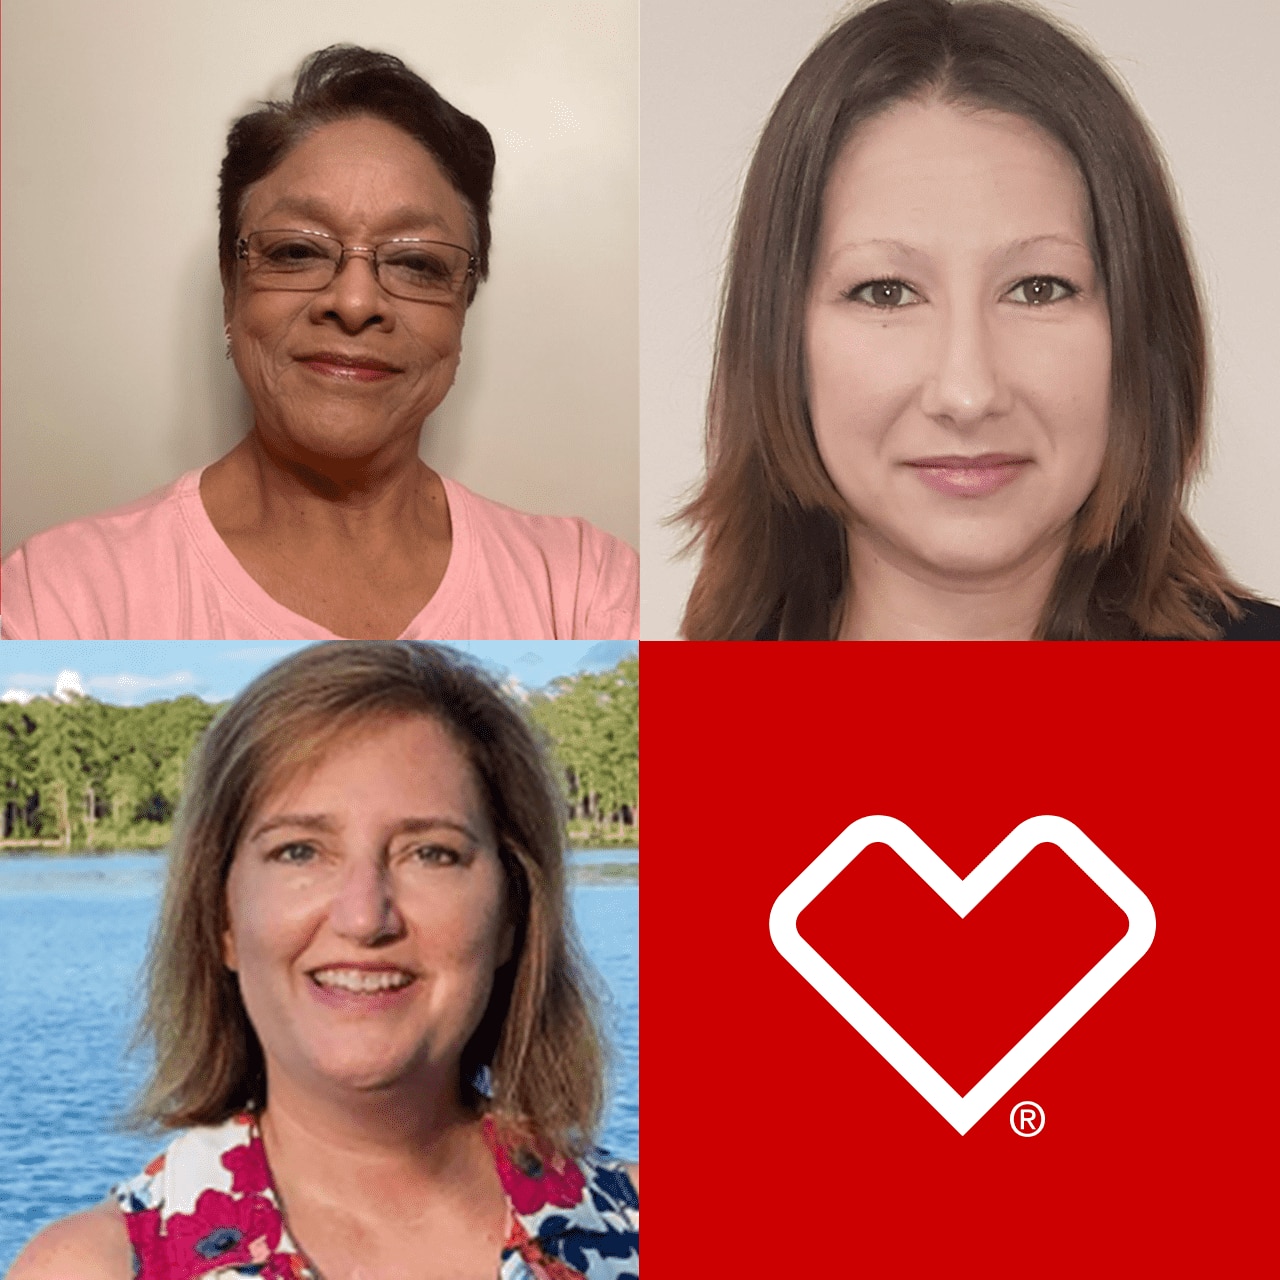 A four block image featuring three headshots of Accordant nurses and the CVS red heart.